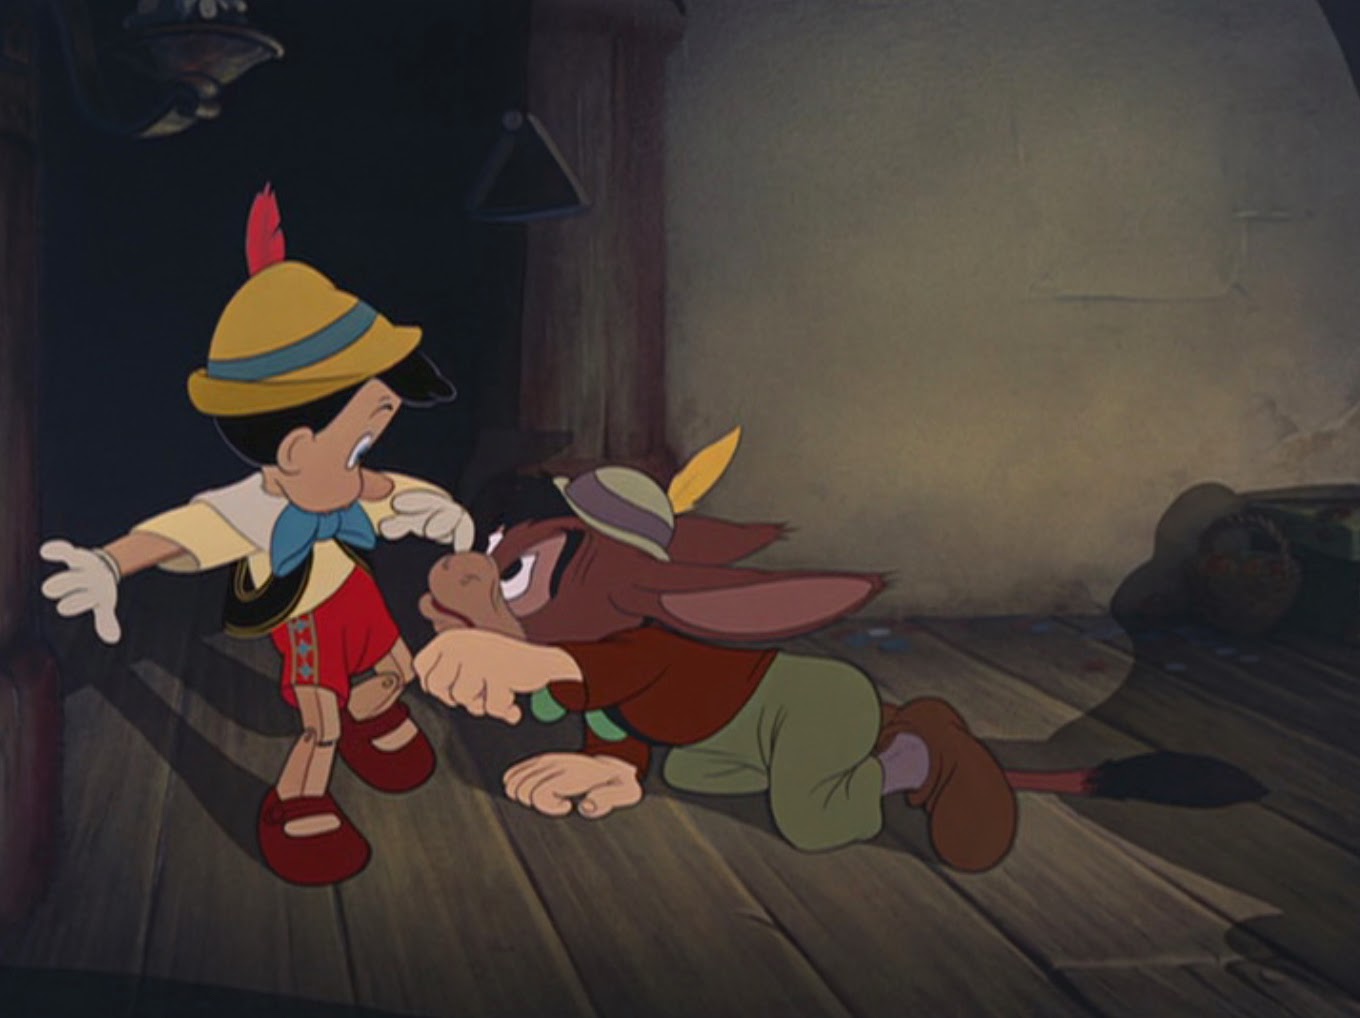 In Pinocchio there's a group of men kidnapping boys and magically turning them into donkeys. The movie ends happily after Pinocchio becomes a real boy, and everybody seems to forget that those men are still donkey-fying kidnapped children.